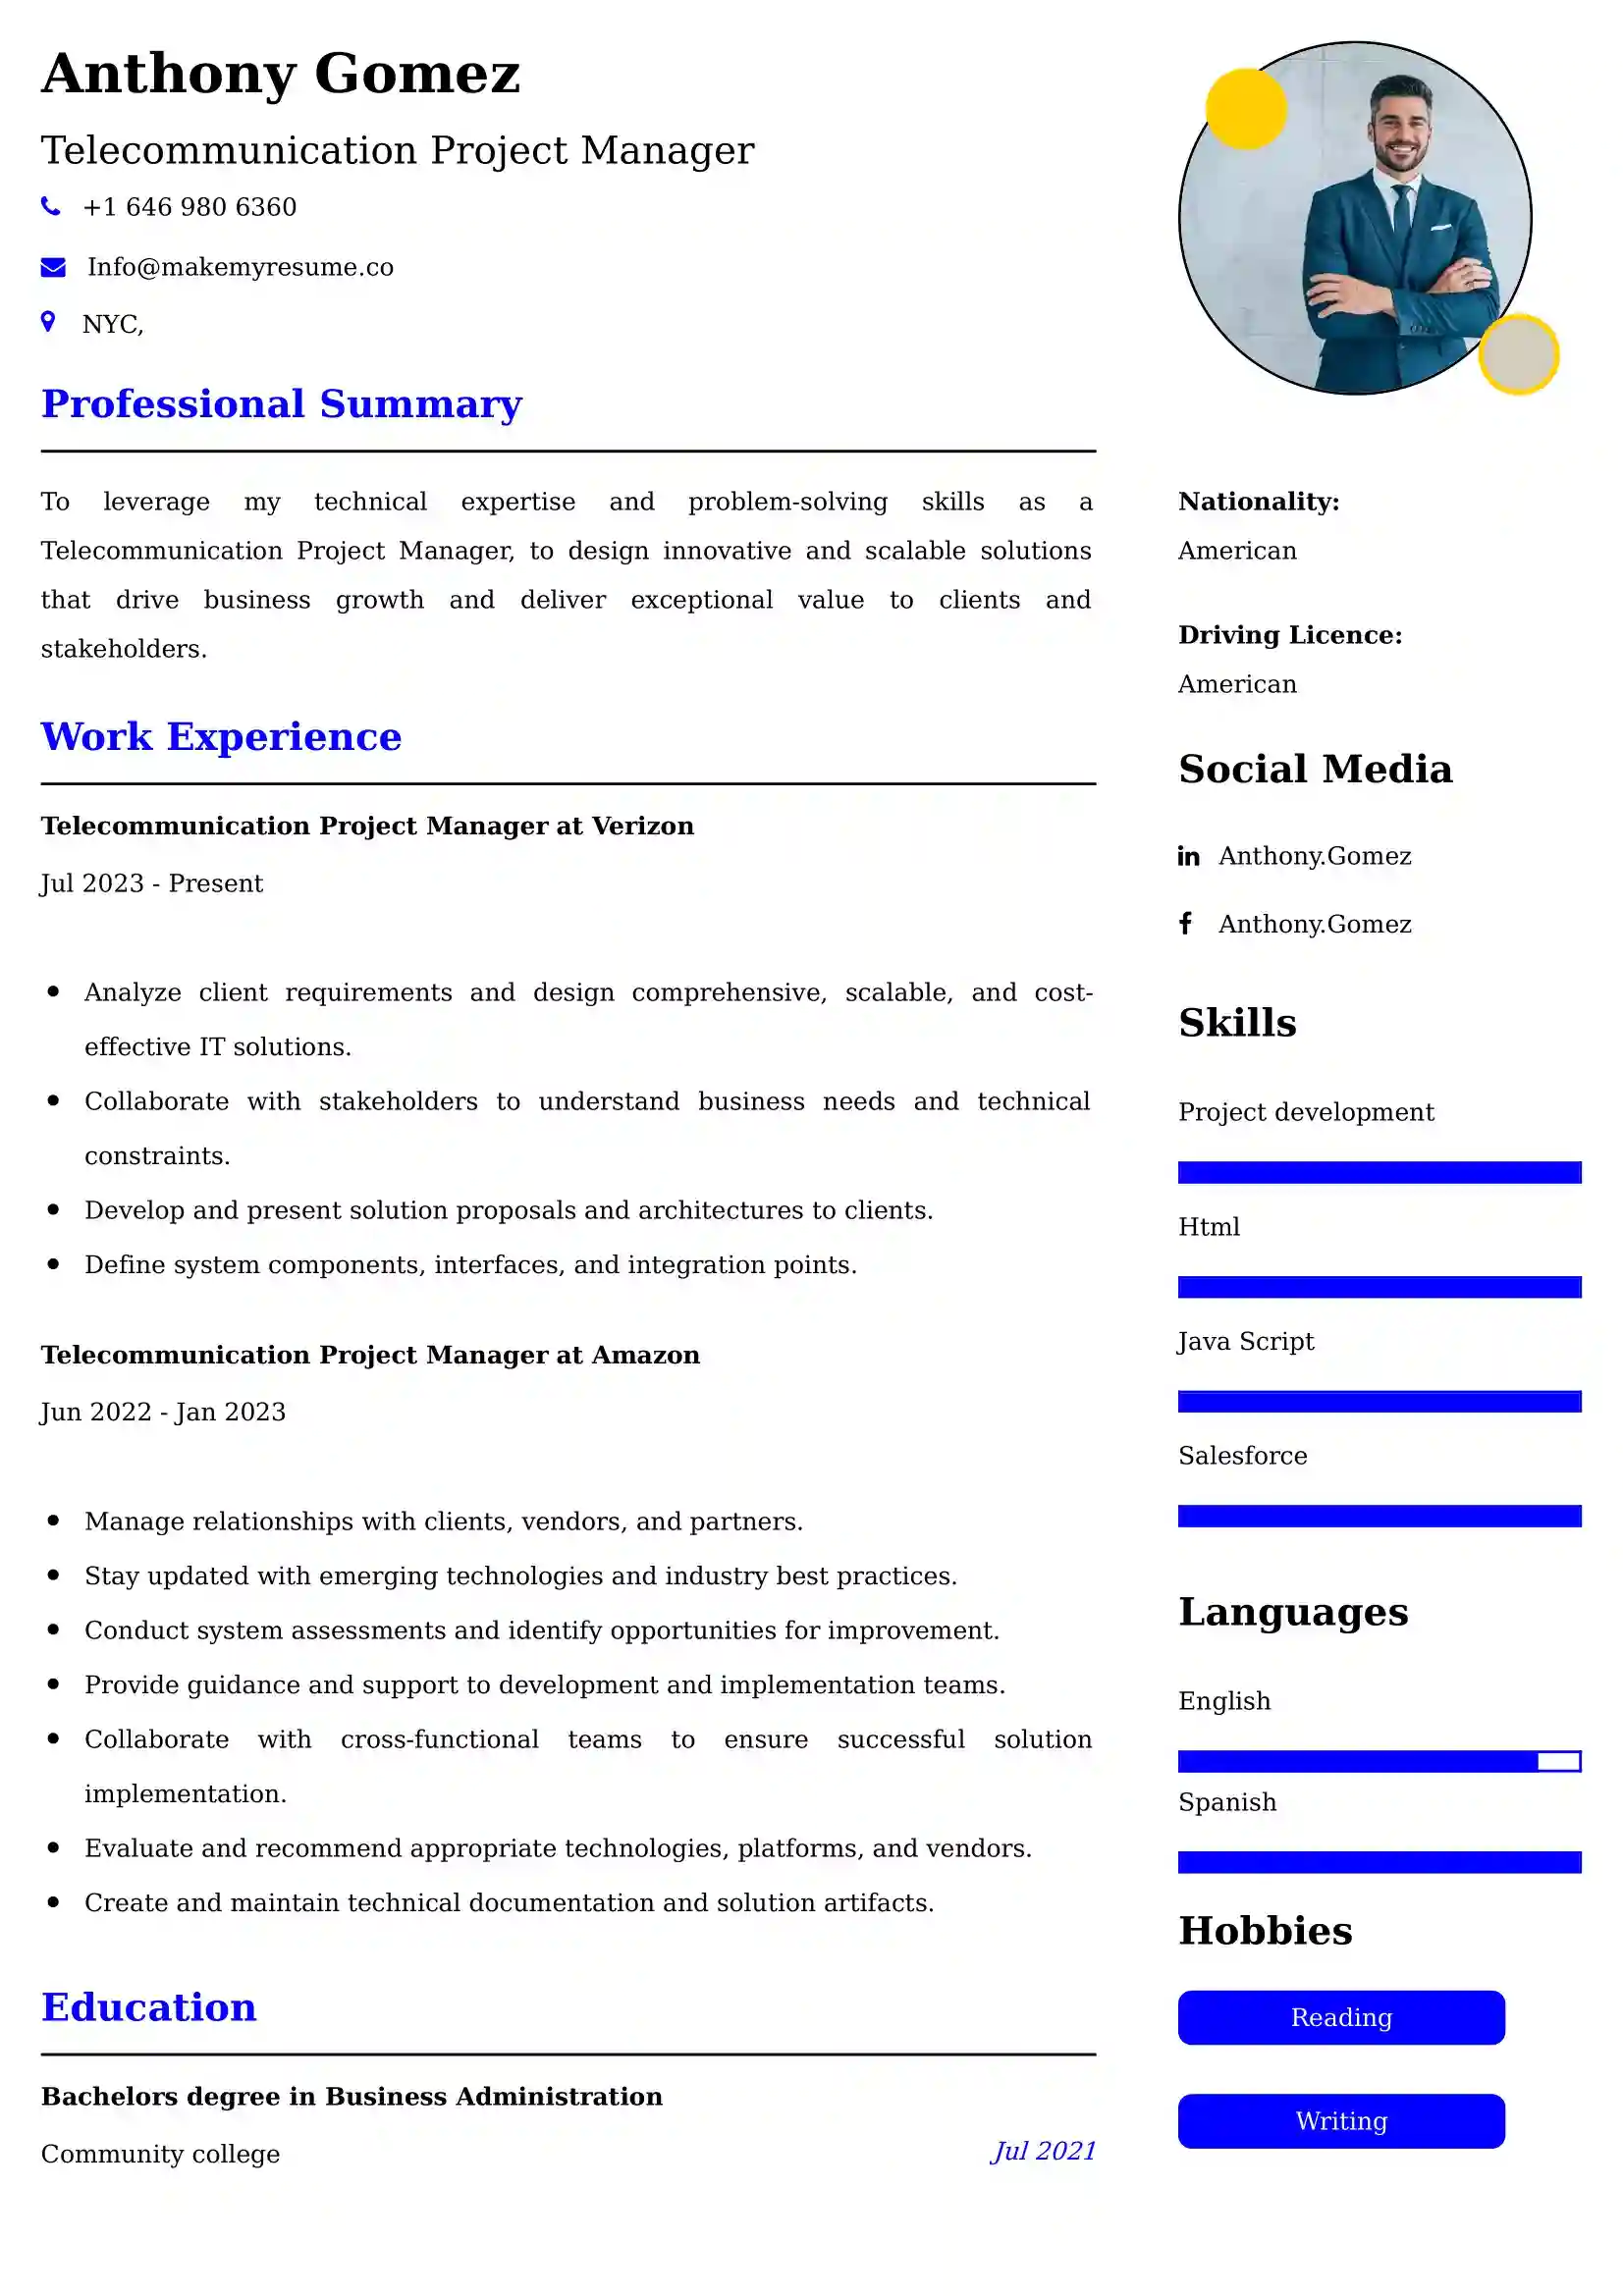 Telecommunication Project Manager Resume Examples for UAE